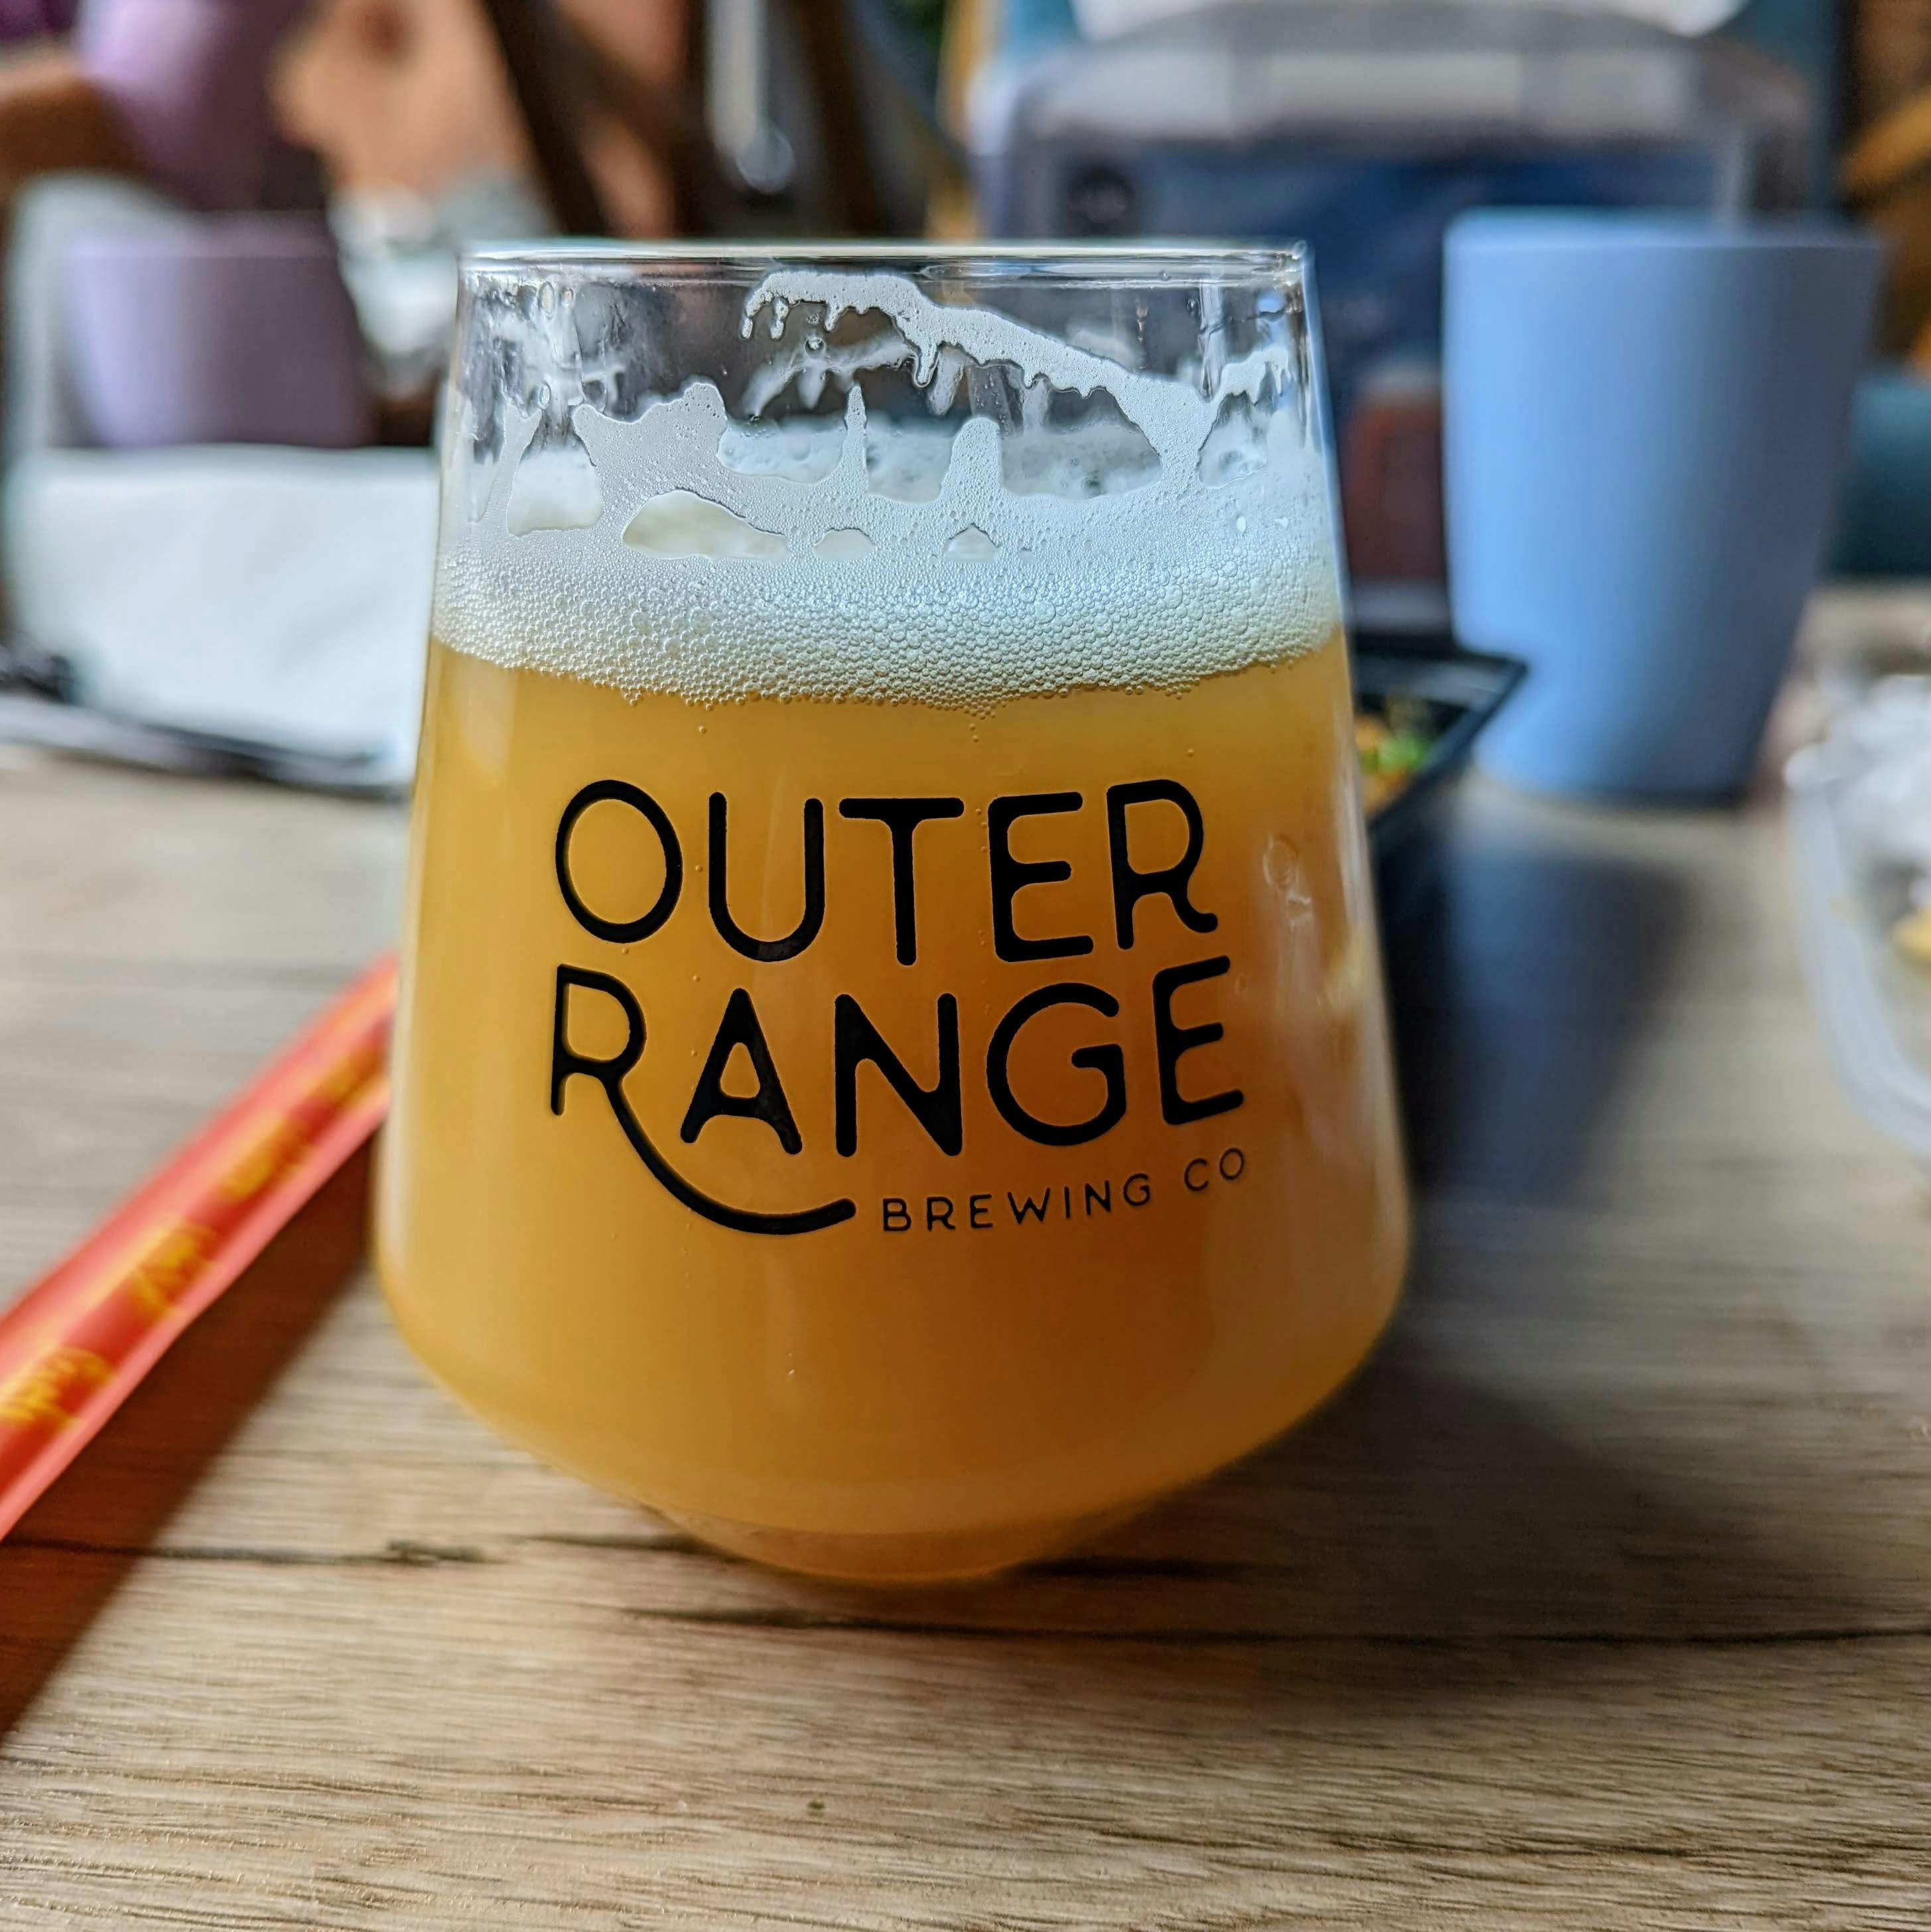 Glass of IPA from Outer Range Brewing Company.